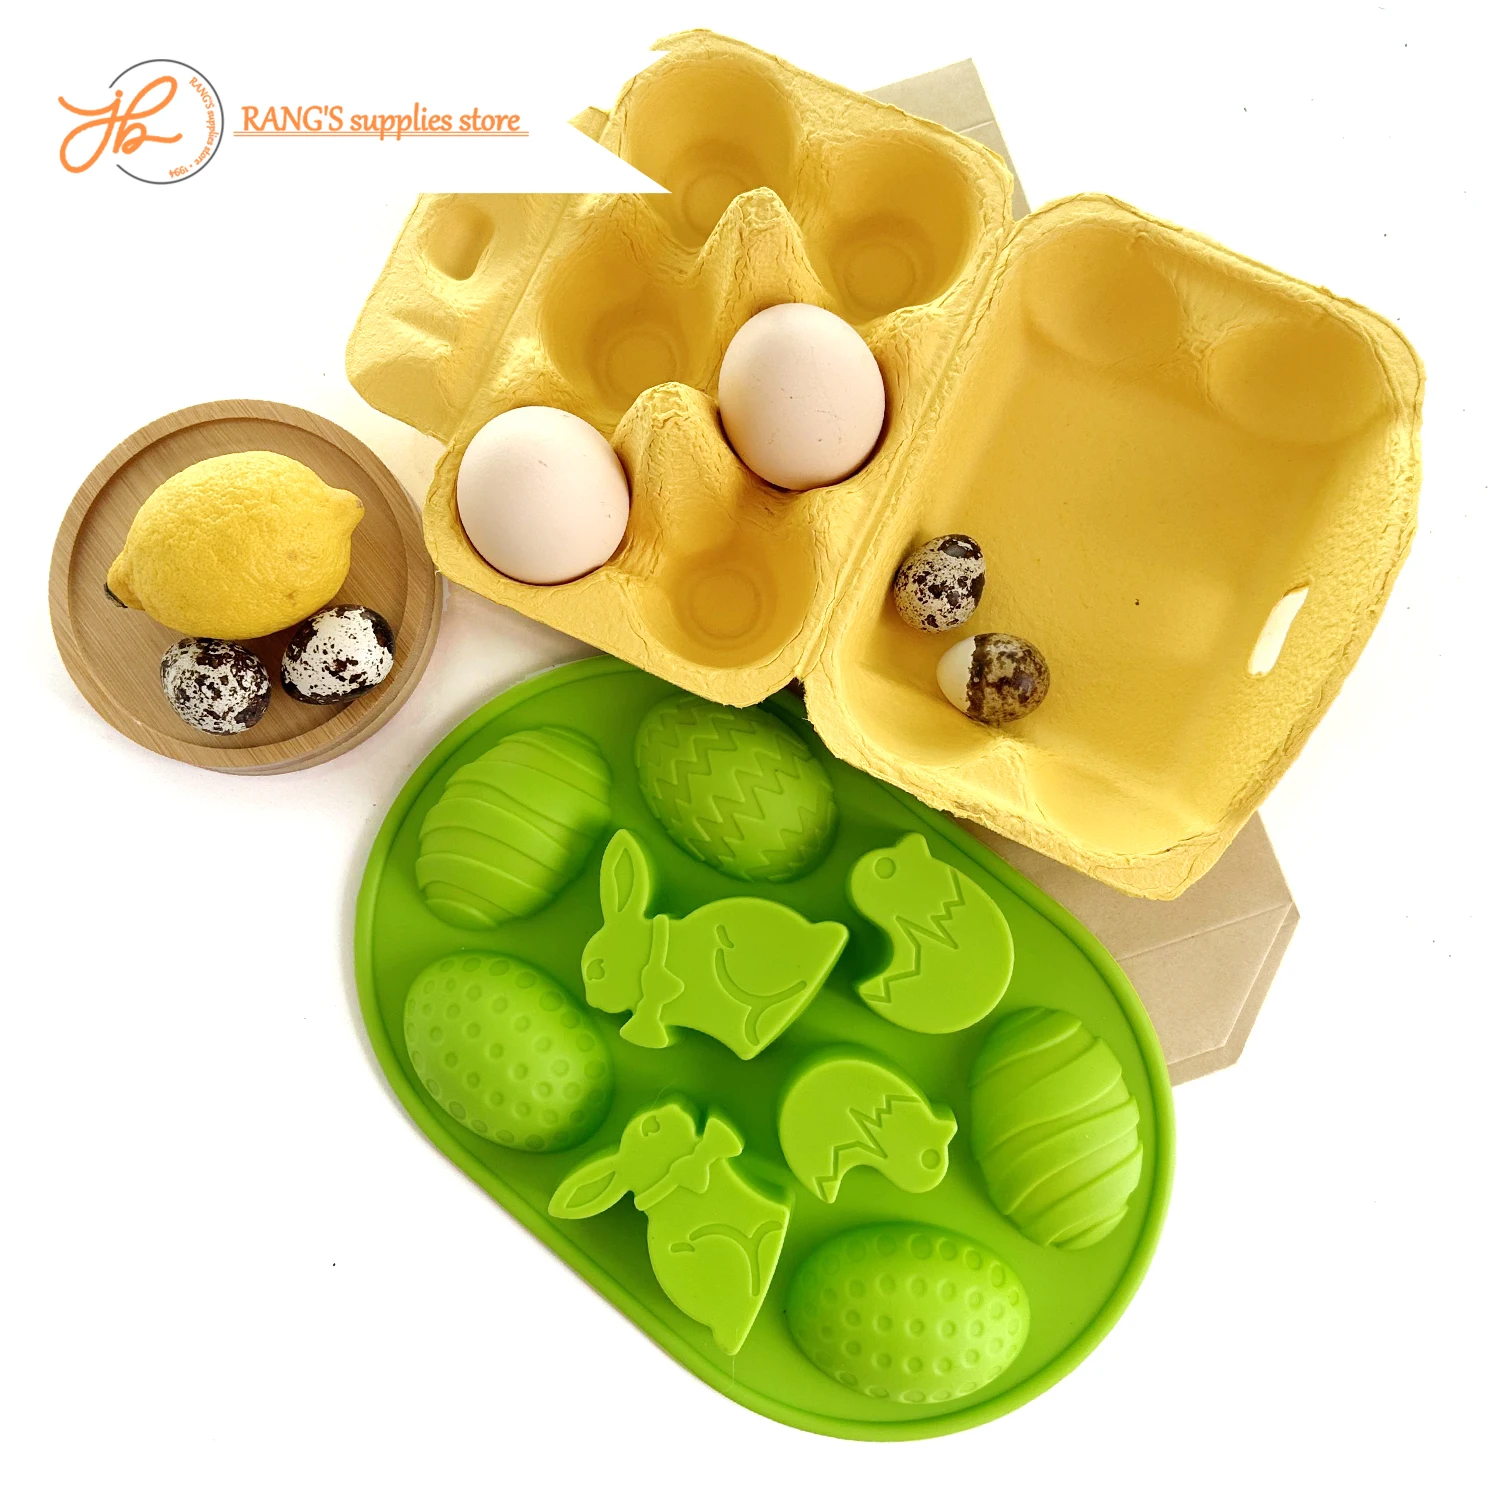 

6Psc 3D Easter Silicone Mold Set 3D Bunny Egg Baking Mould Tray DIY Baking Tool for Chocolate Cake Dessert Candy Mousse Pastry